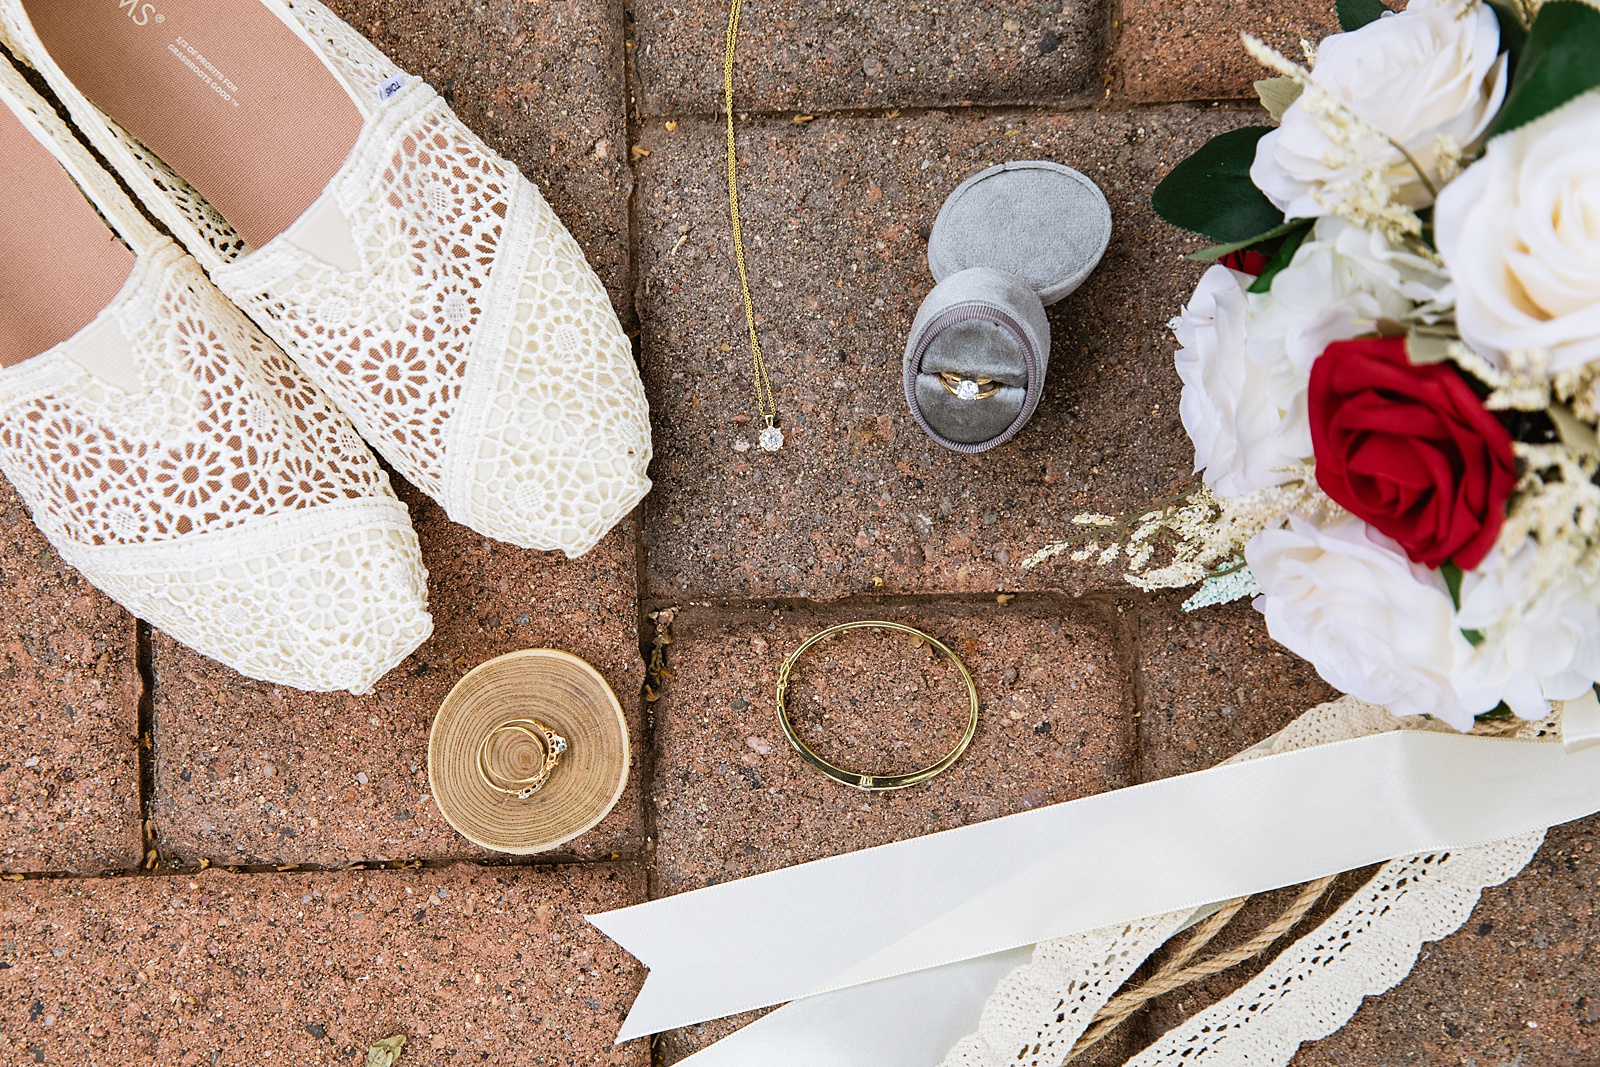 Bride's wedding day details of lace shoes, jewelry, wedding rings and bouquet by PMA Photography.